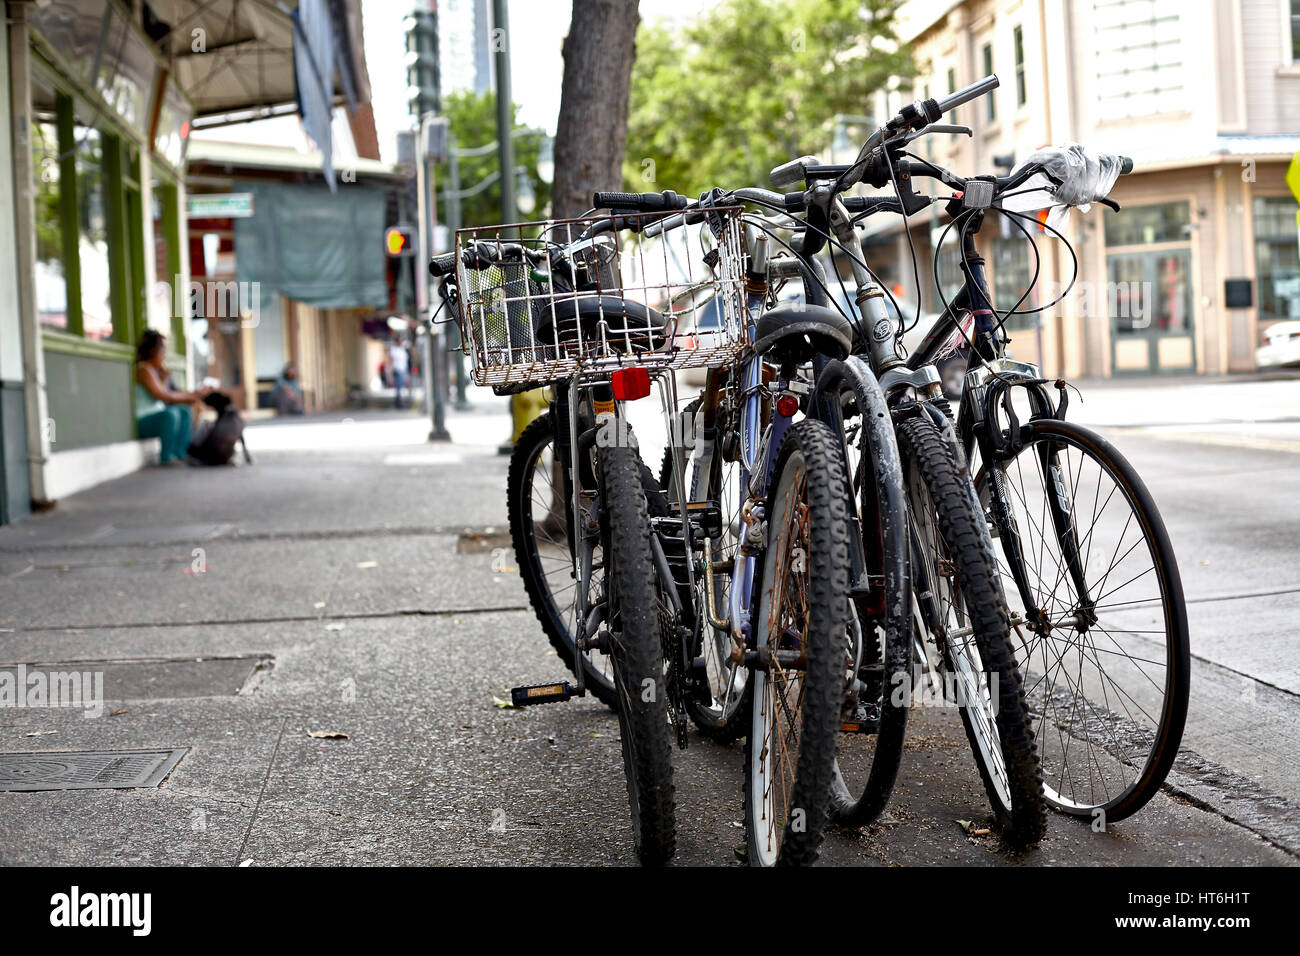 Honolulu; Hawaii; USA - August 6; 2016: Bicycles on sidewalk in Chinatown Historic District; a popular local destination and tourist attraction. Stock Photo